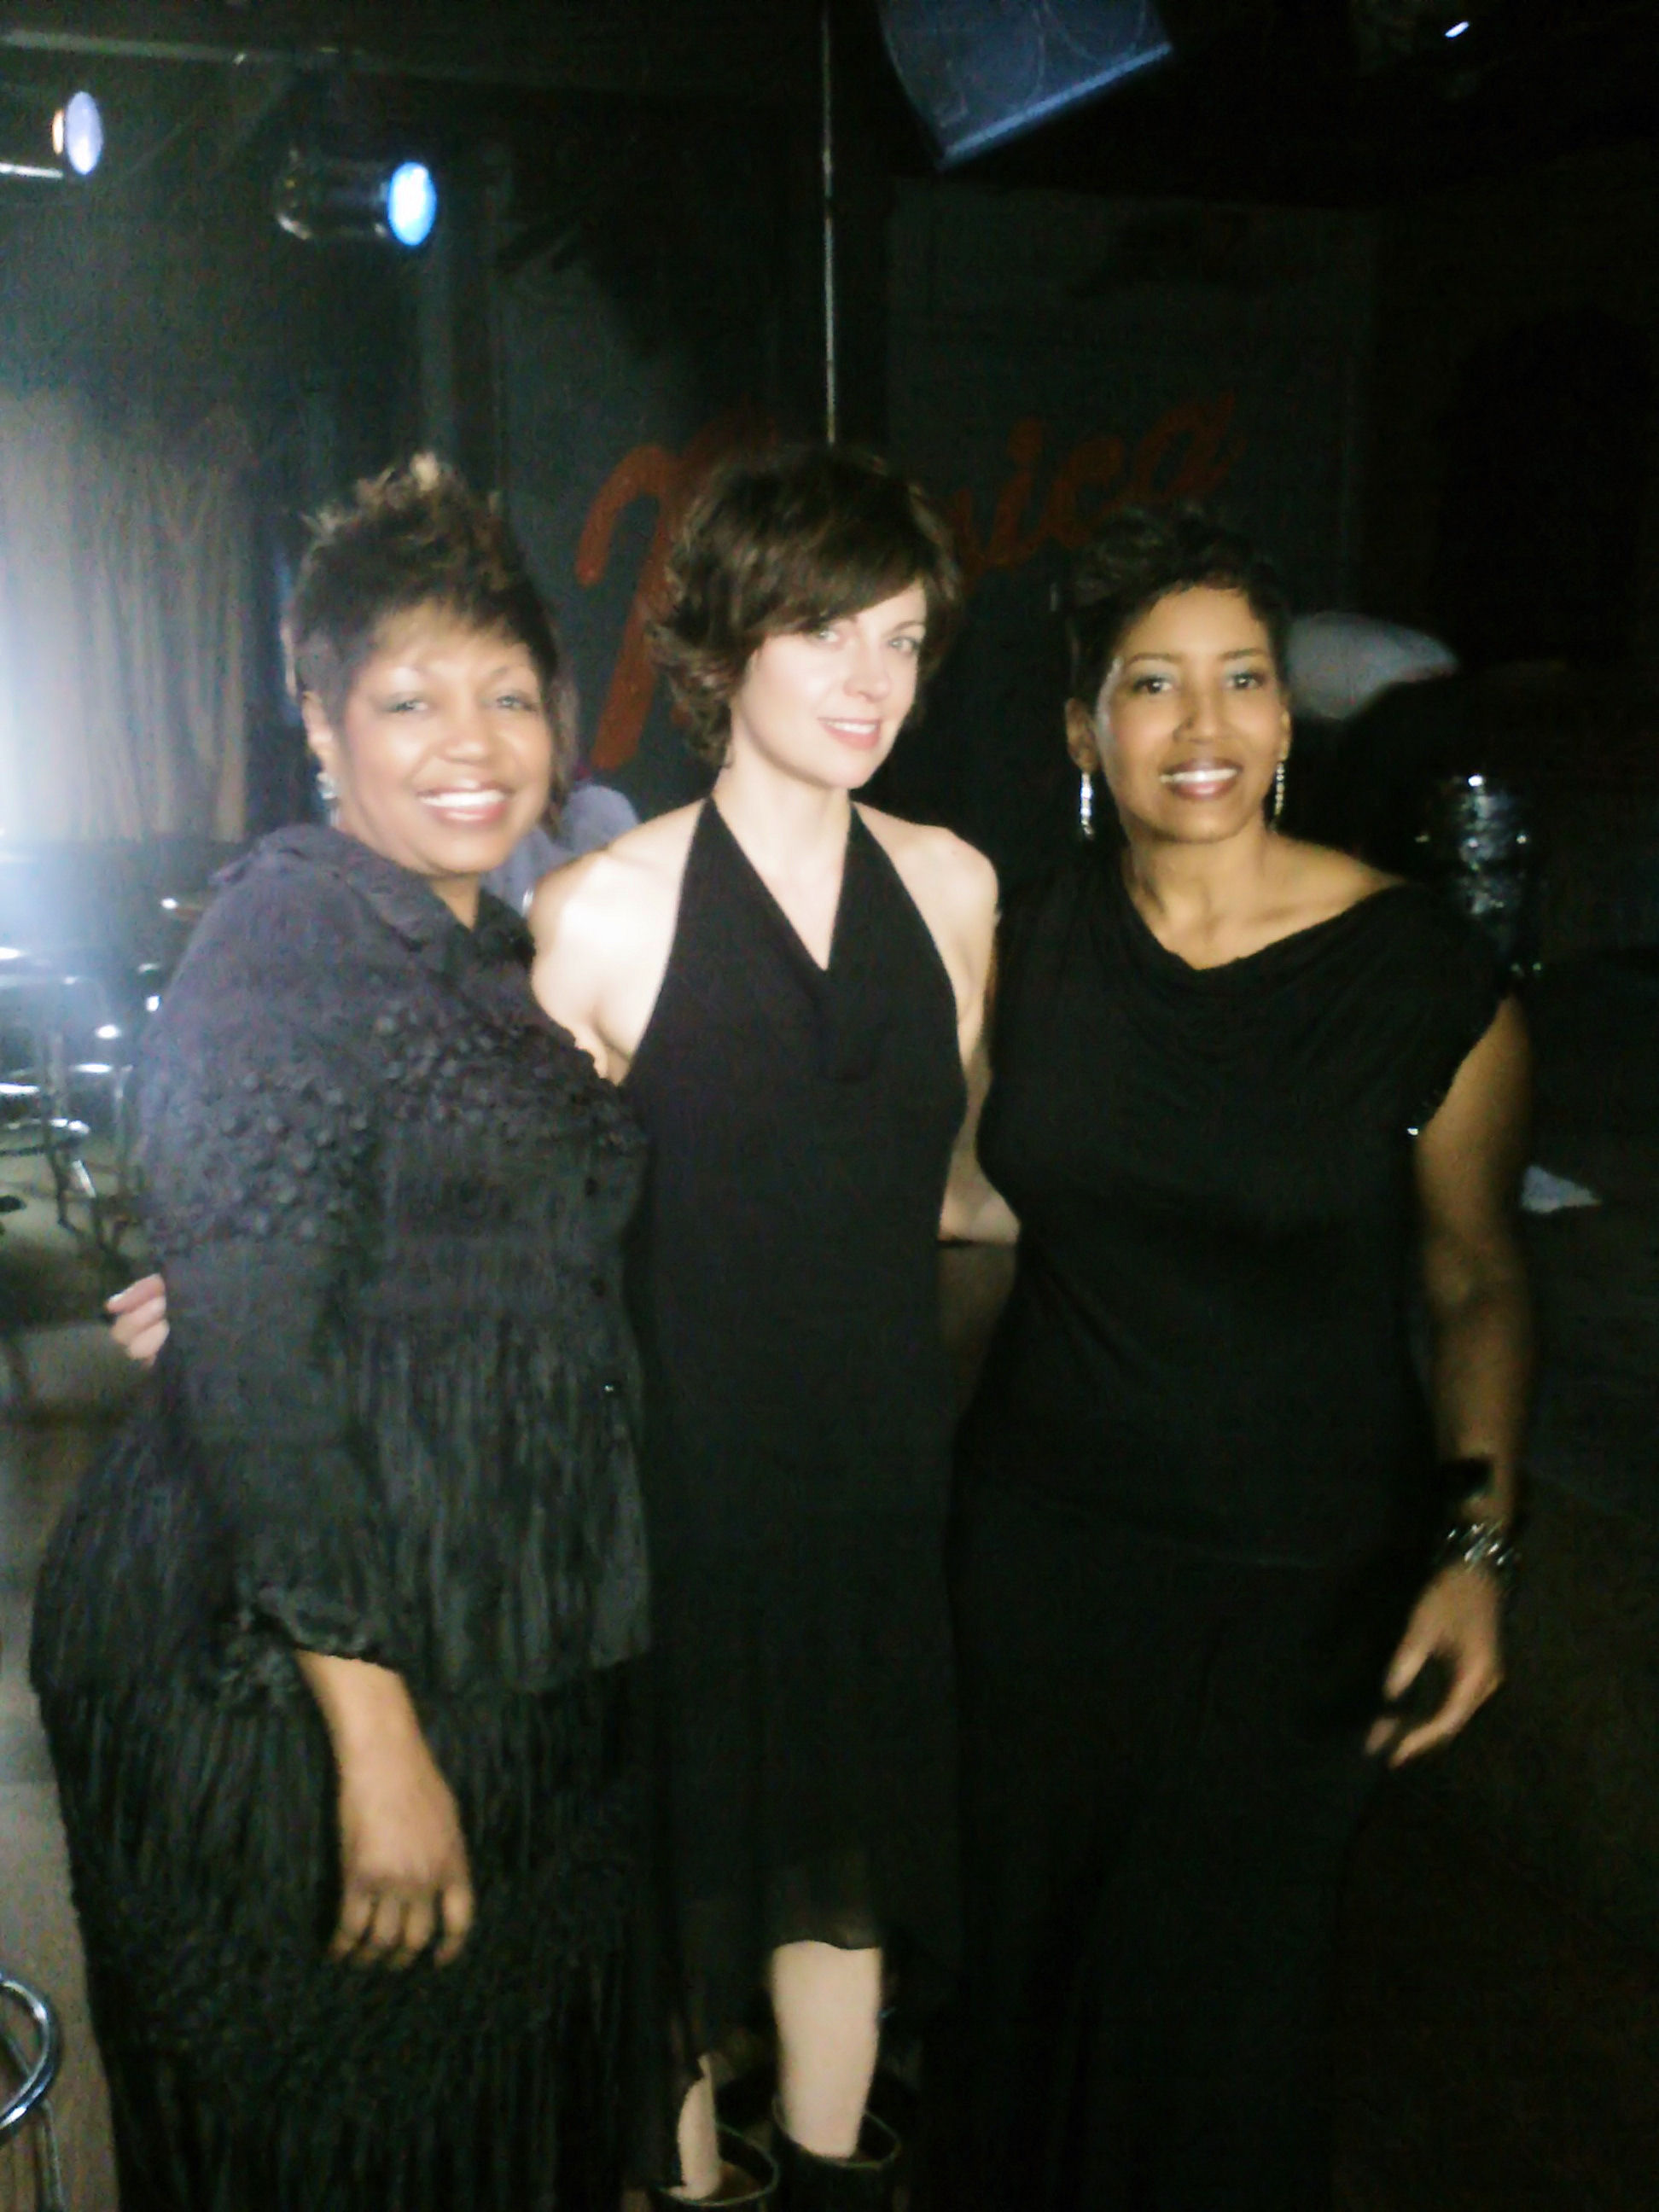 Movie Let Me Go, With Kate Tucker and Gwendolyn Cheatham